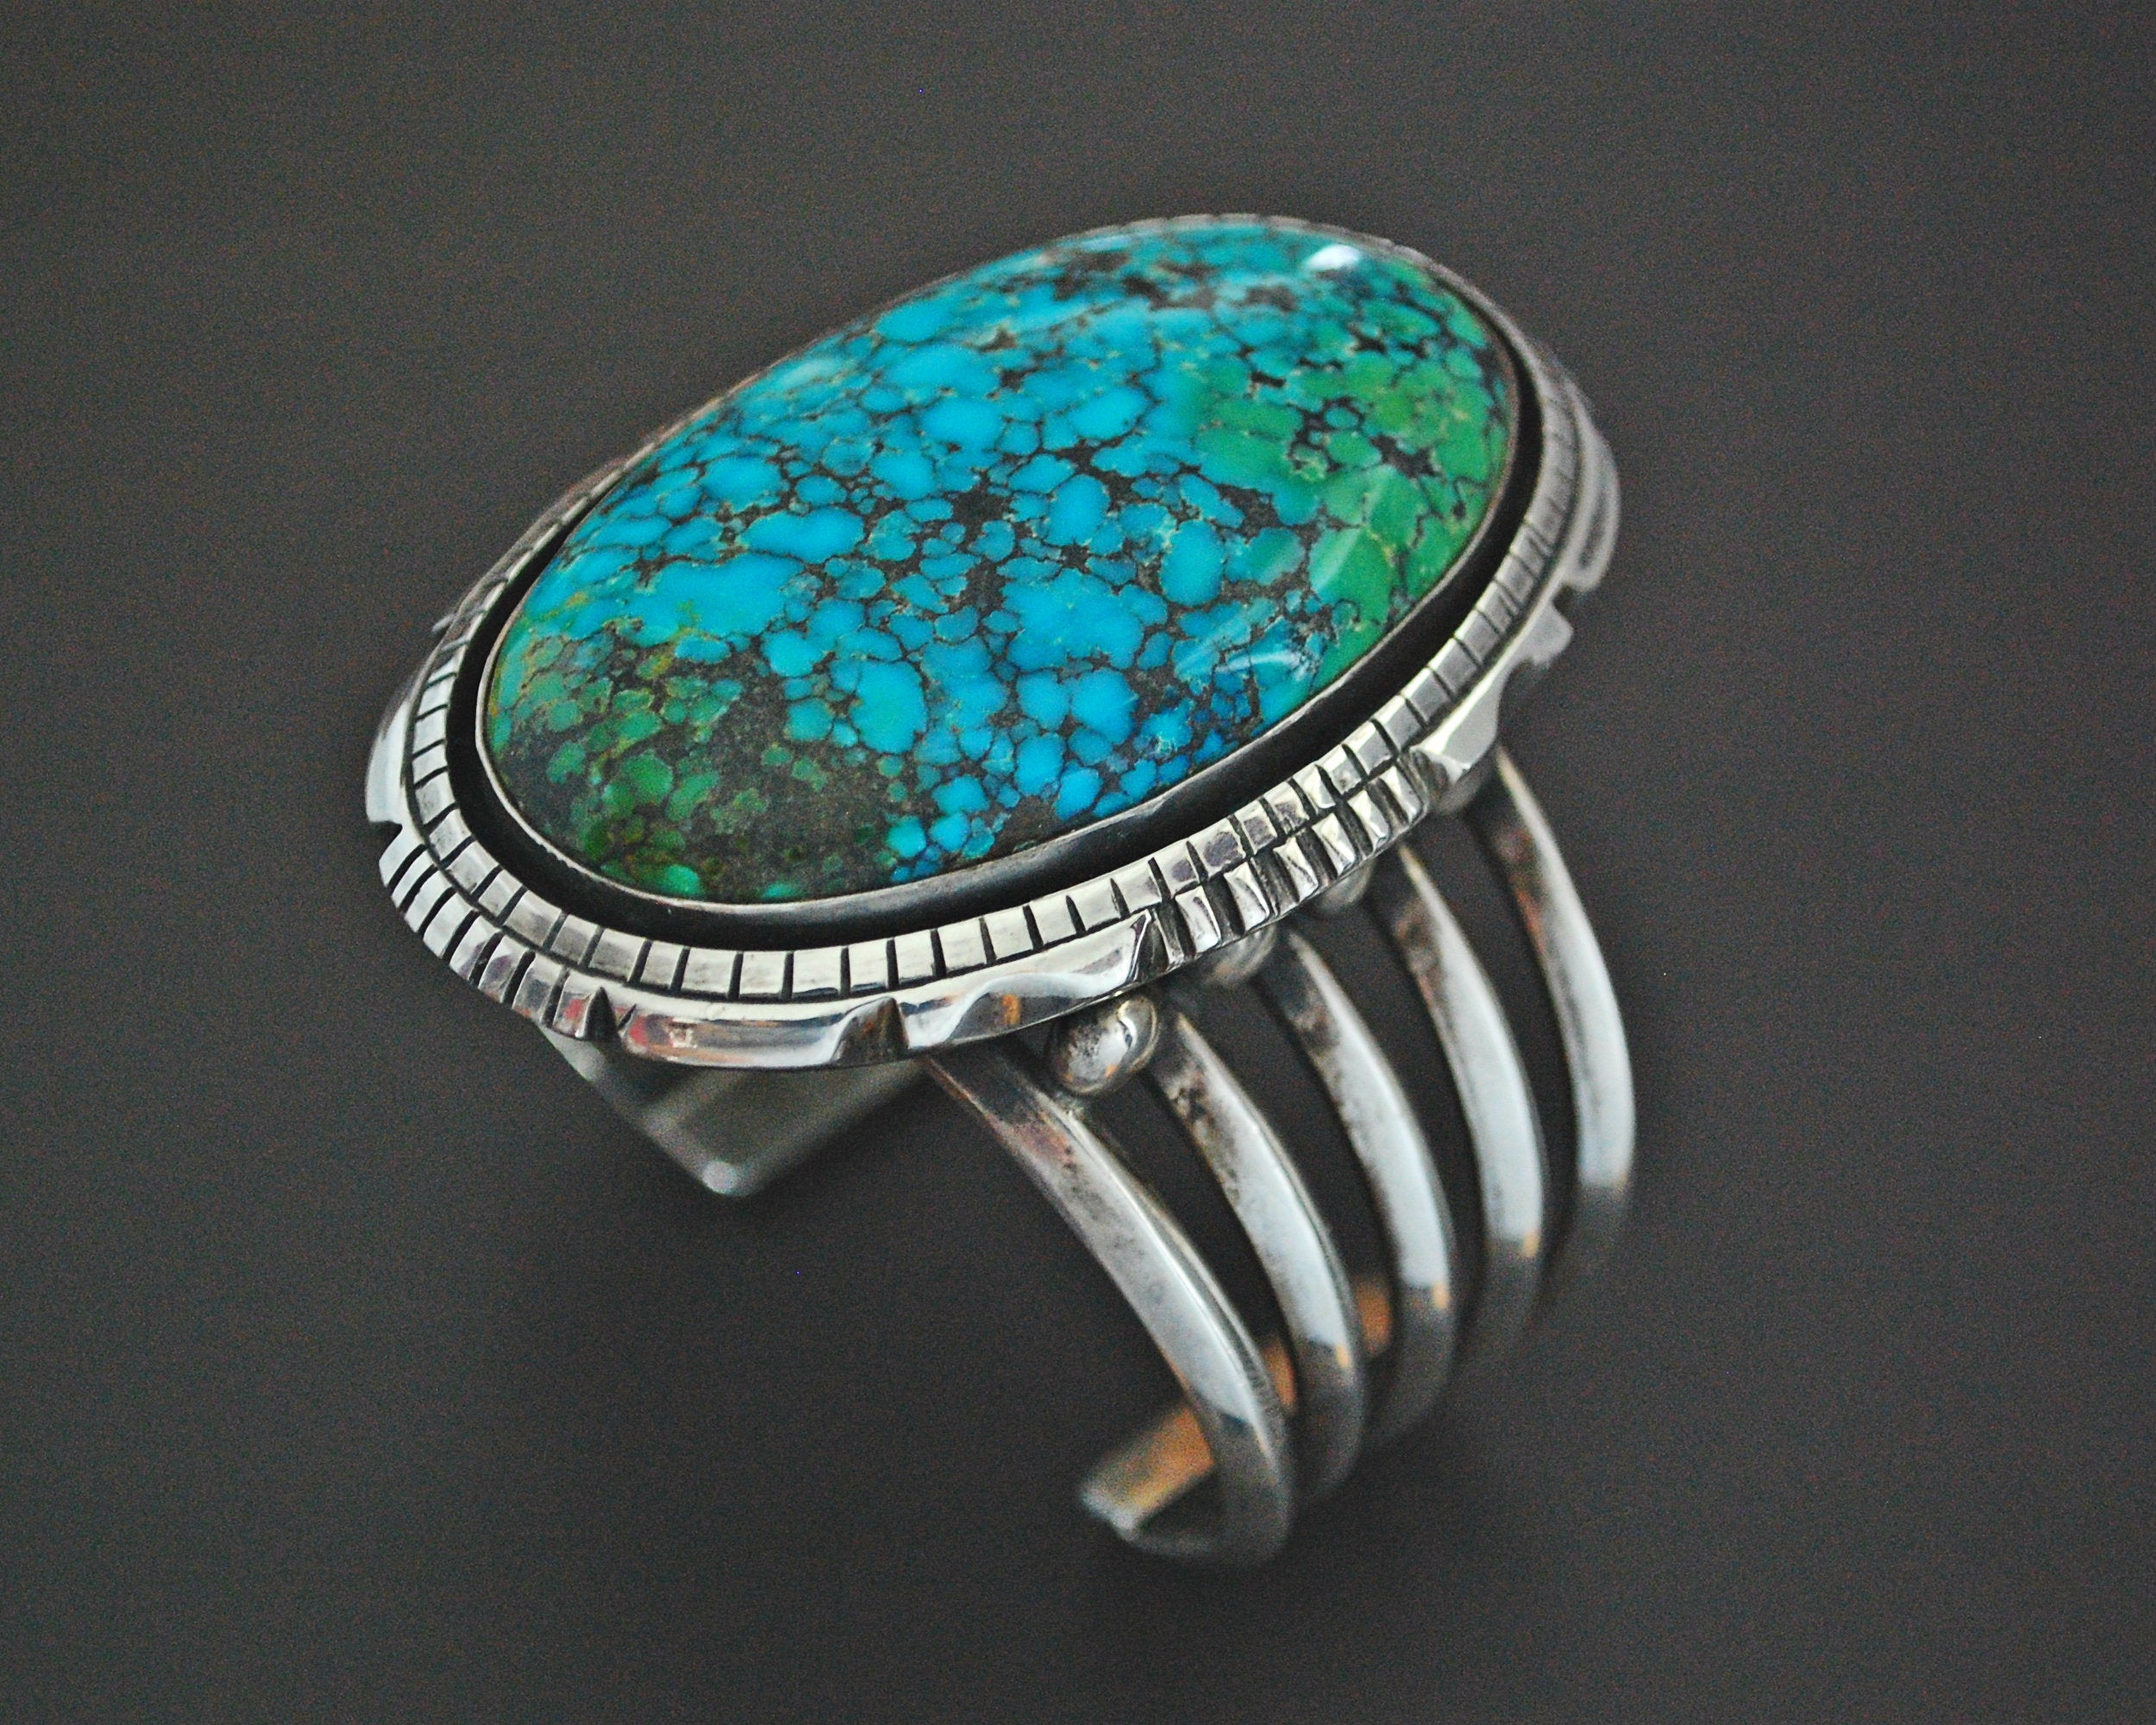 Huge Mexican Turquoise Cuff Bracelet - Heavy